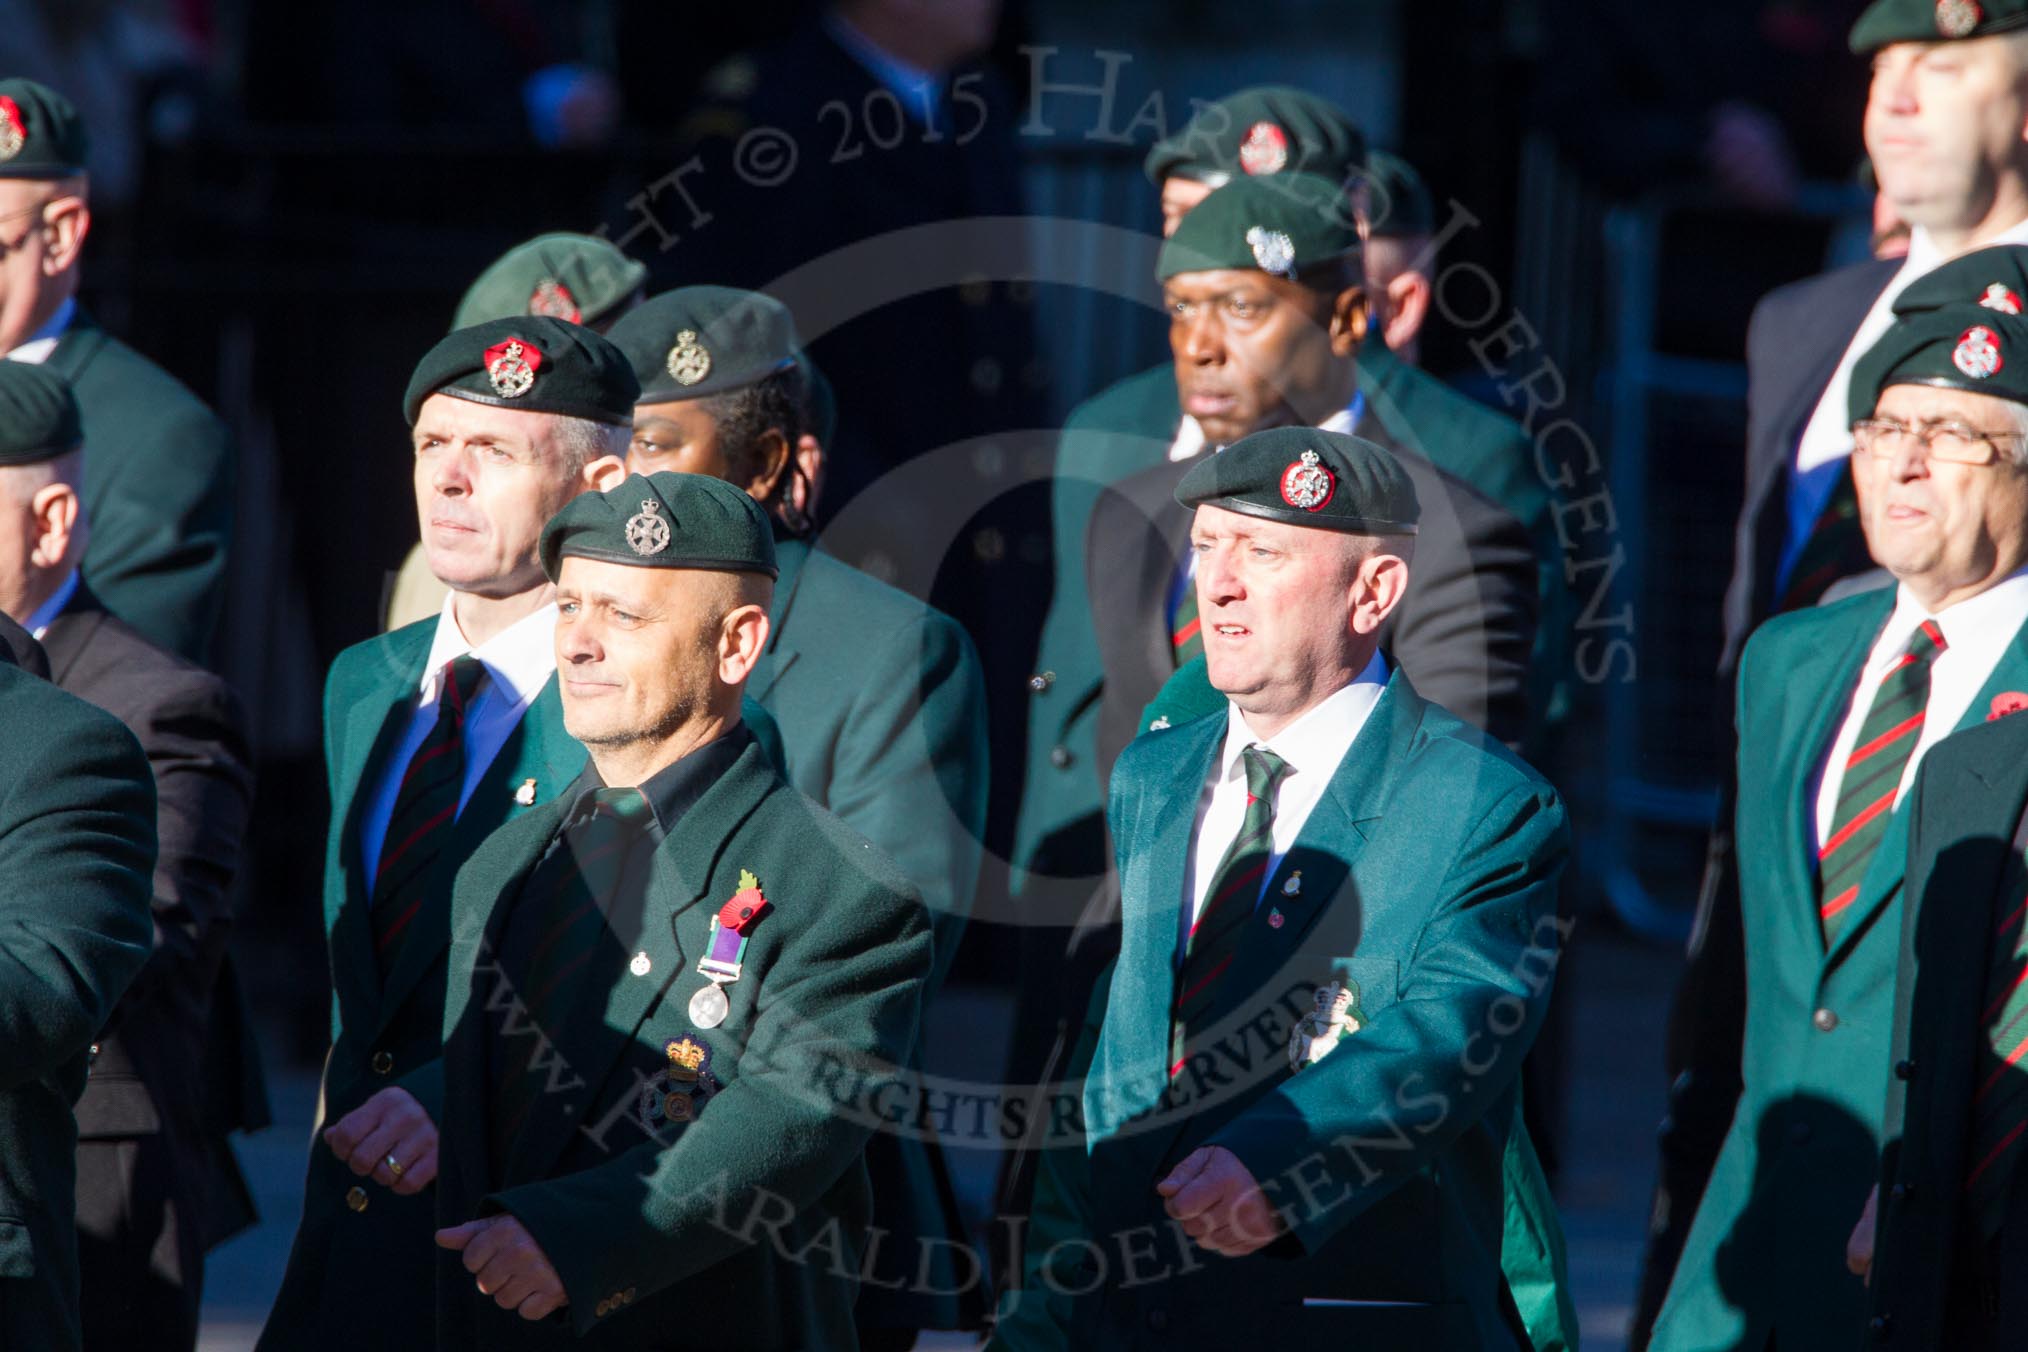 Remembrance Sunday Cenotaph March Past 2013: A16 - Royal Green Jackets Association..
Press stand opposite the Foreign Office building, Whitehall, London SW1,
London,
Greater London,
United Kingdom,
on 10 November 2013 at 11:56, image #1135